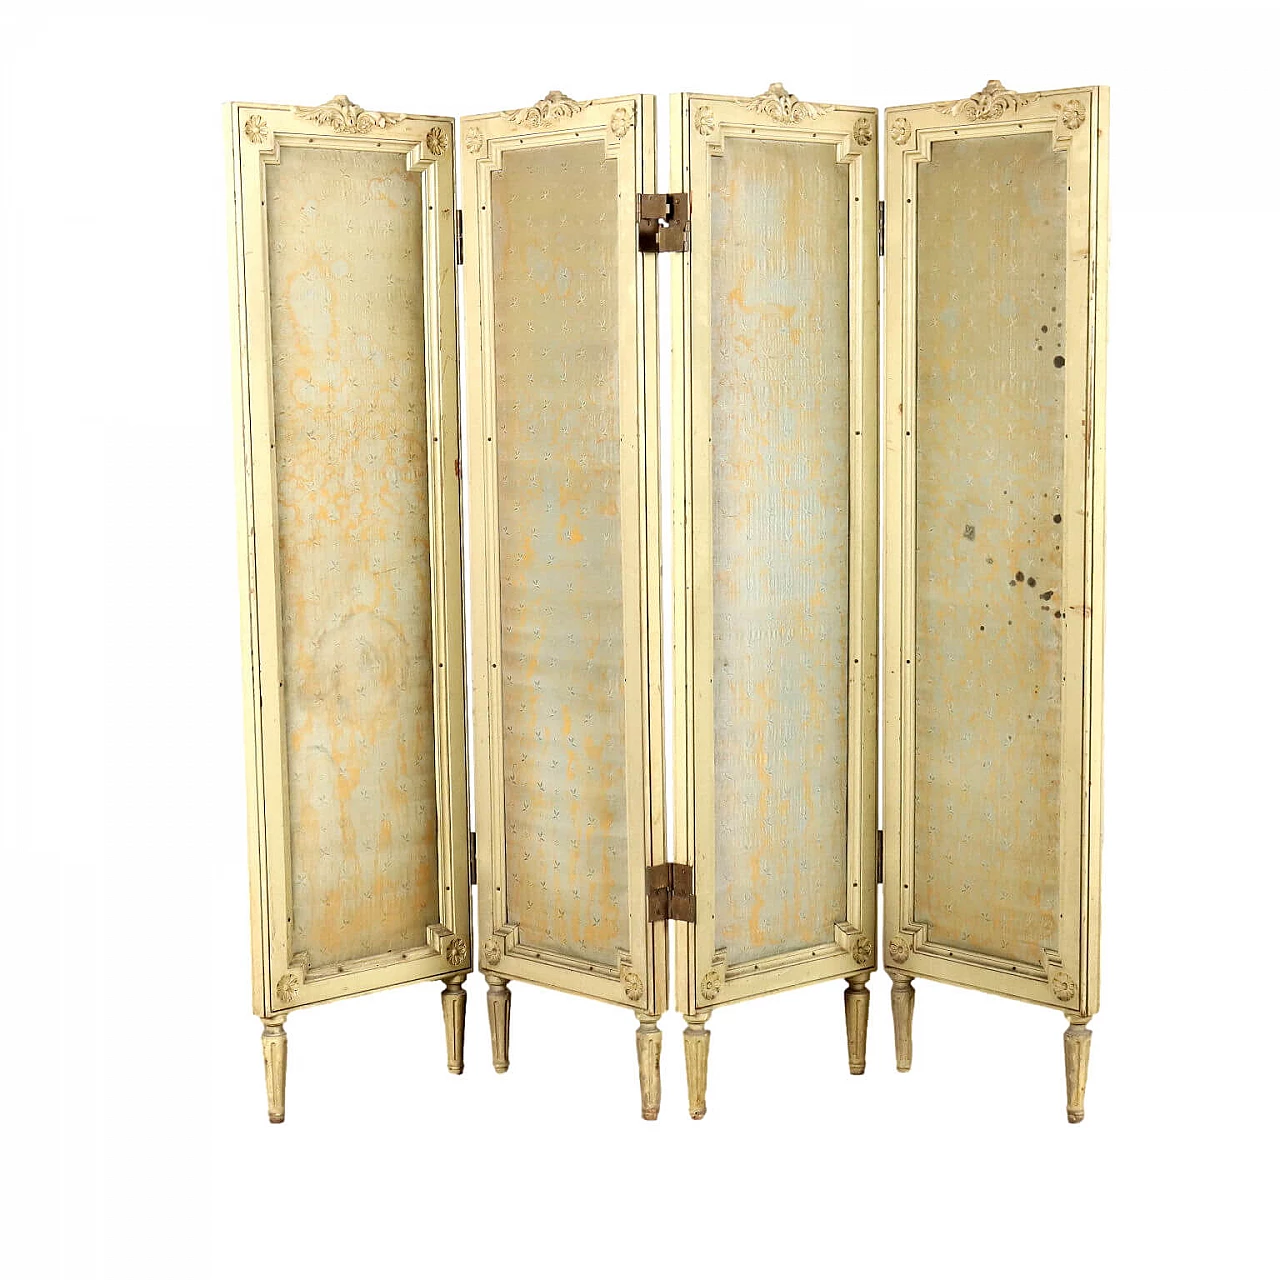 Neoclassical style lacquered wood and fabric screen 1